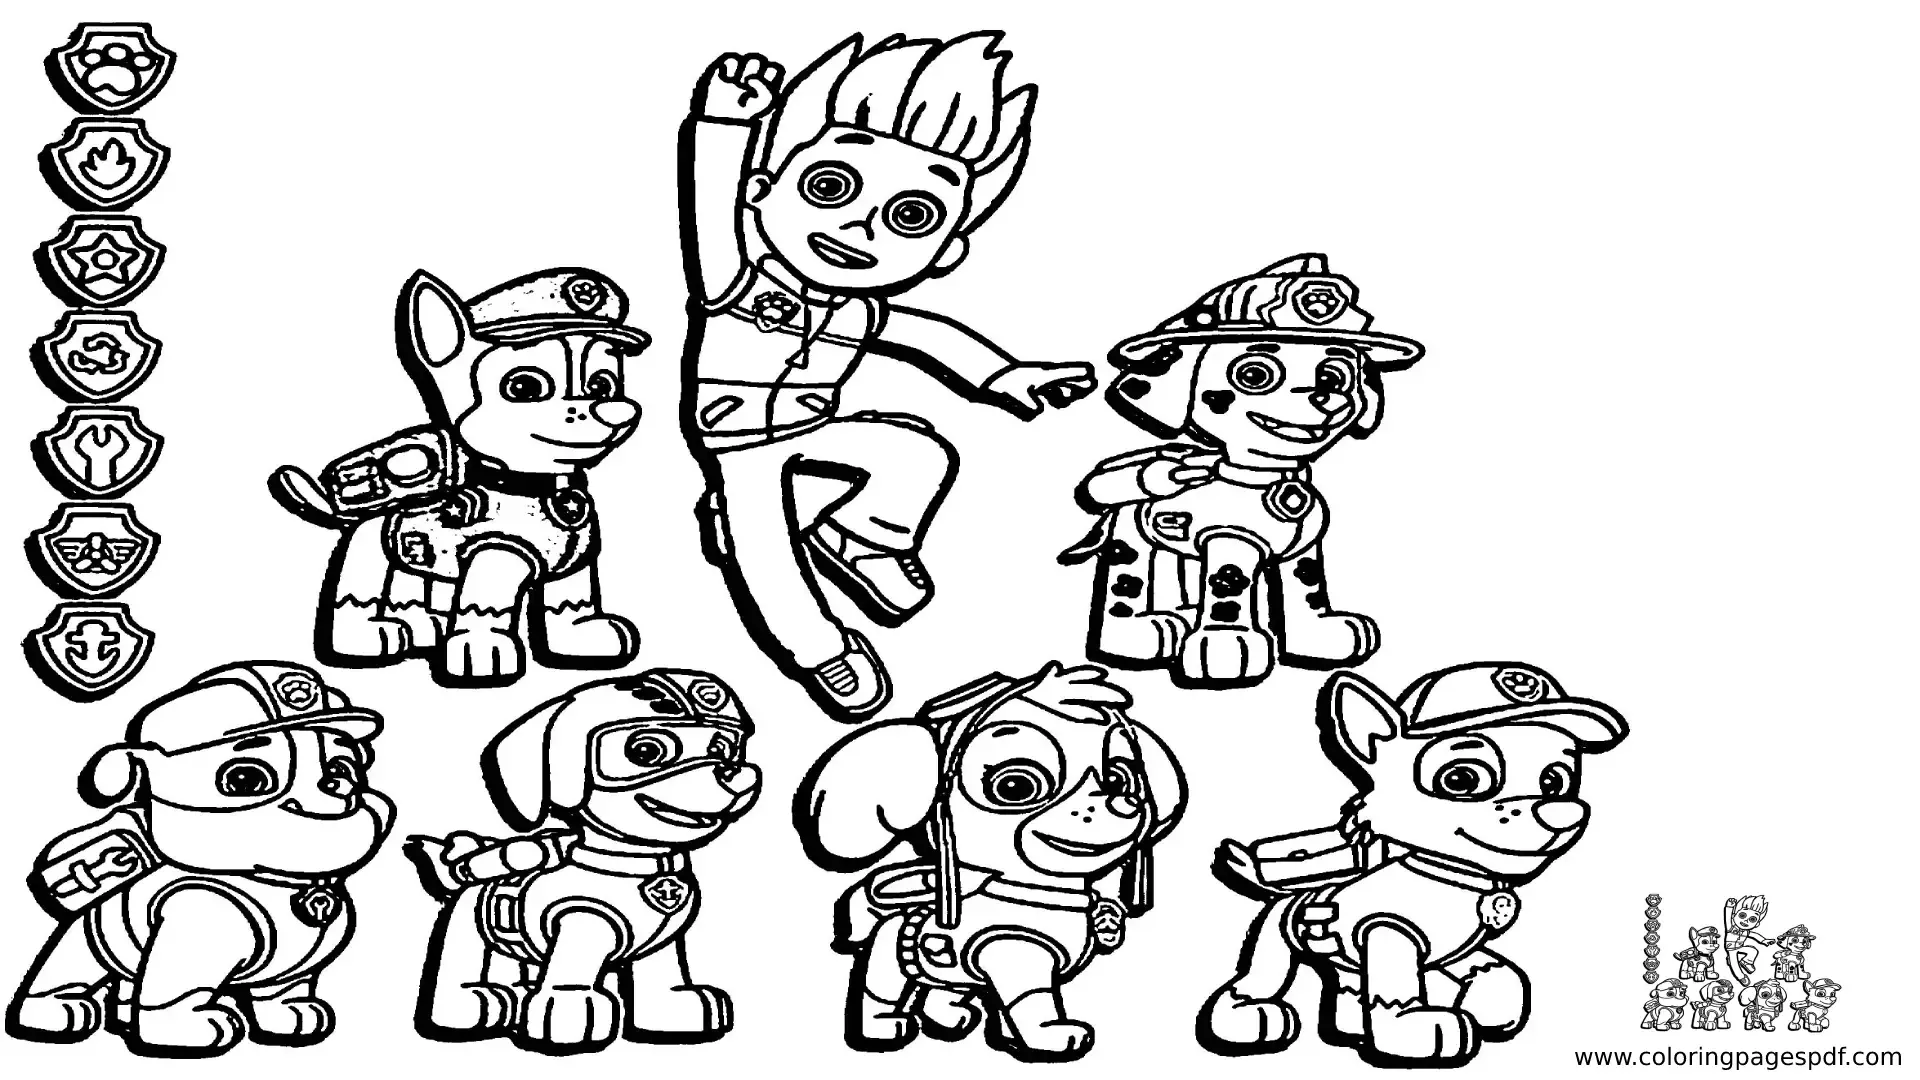 Coloring Pages Of Paw Patrol Characters